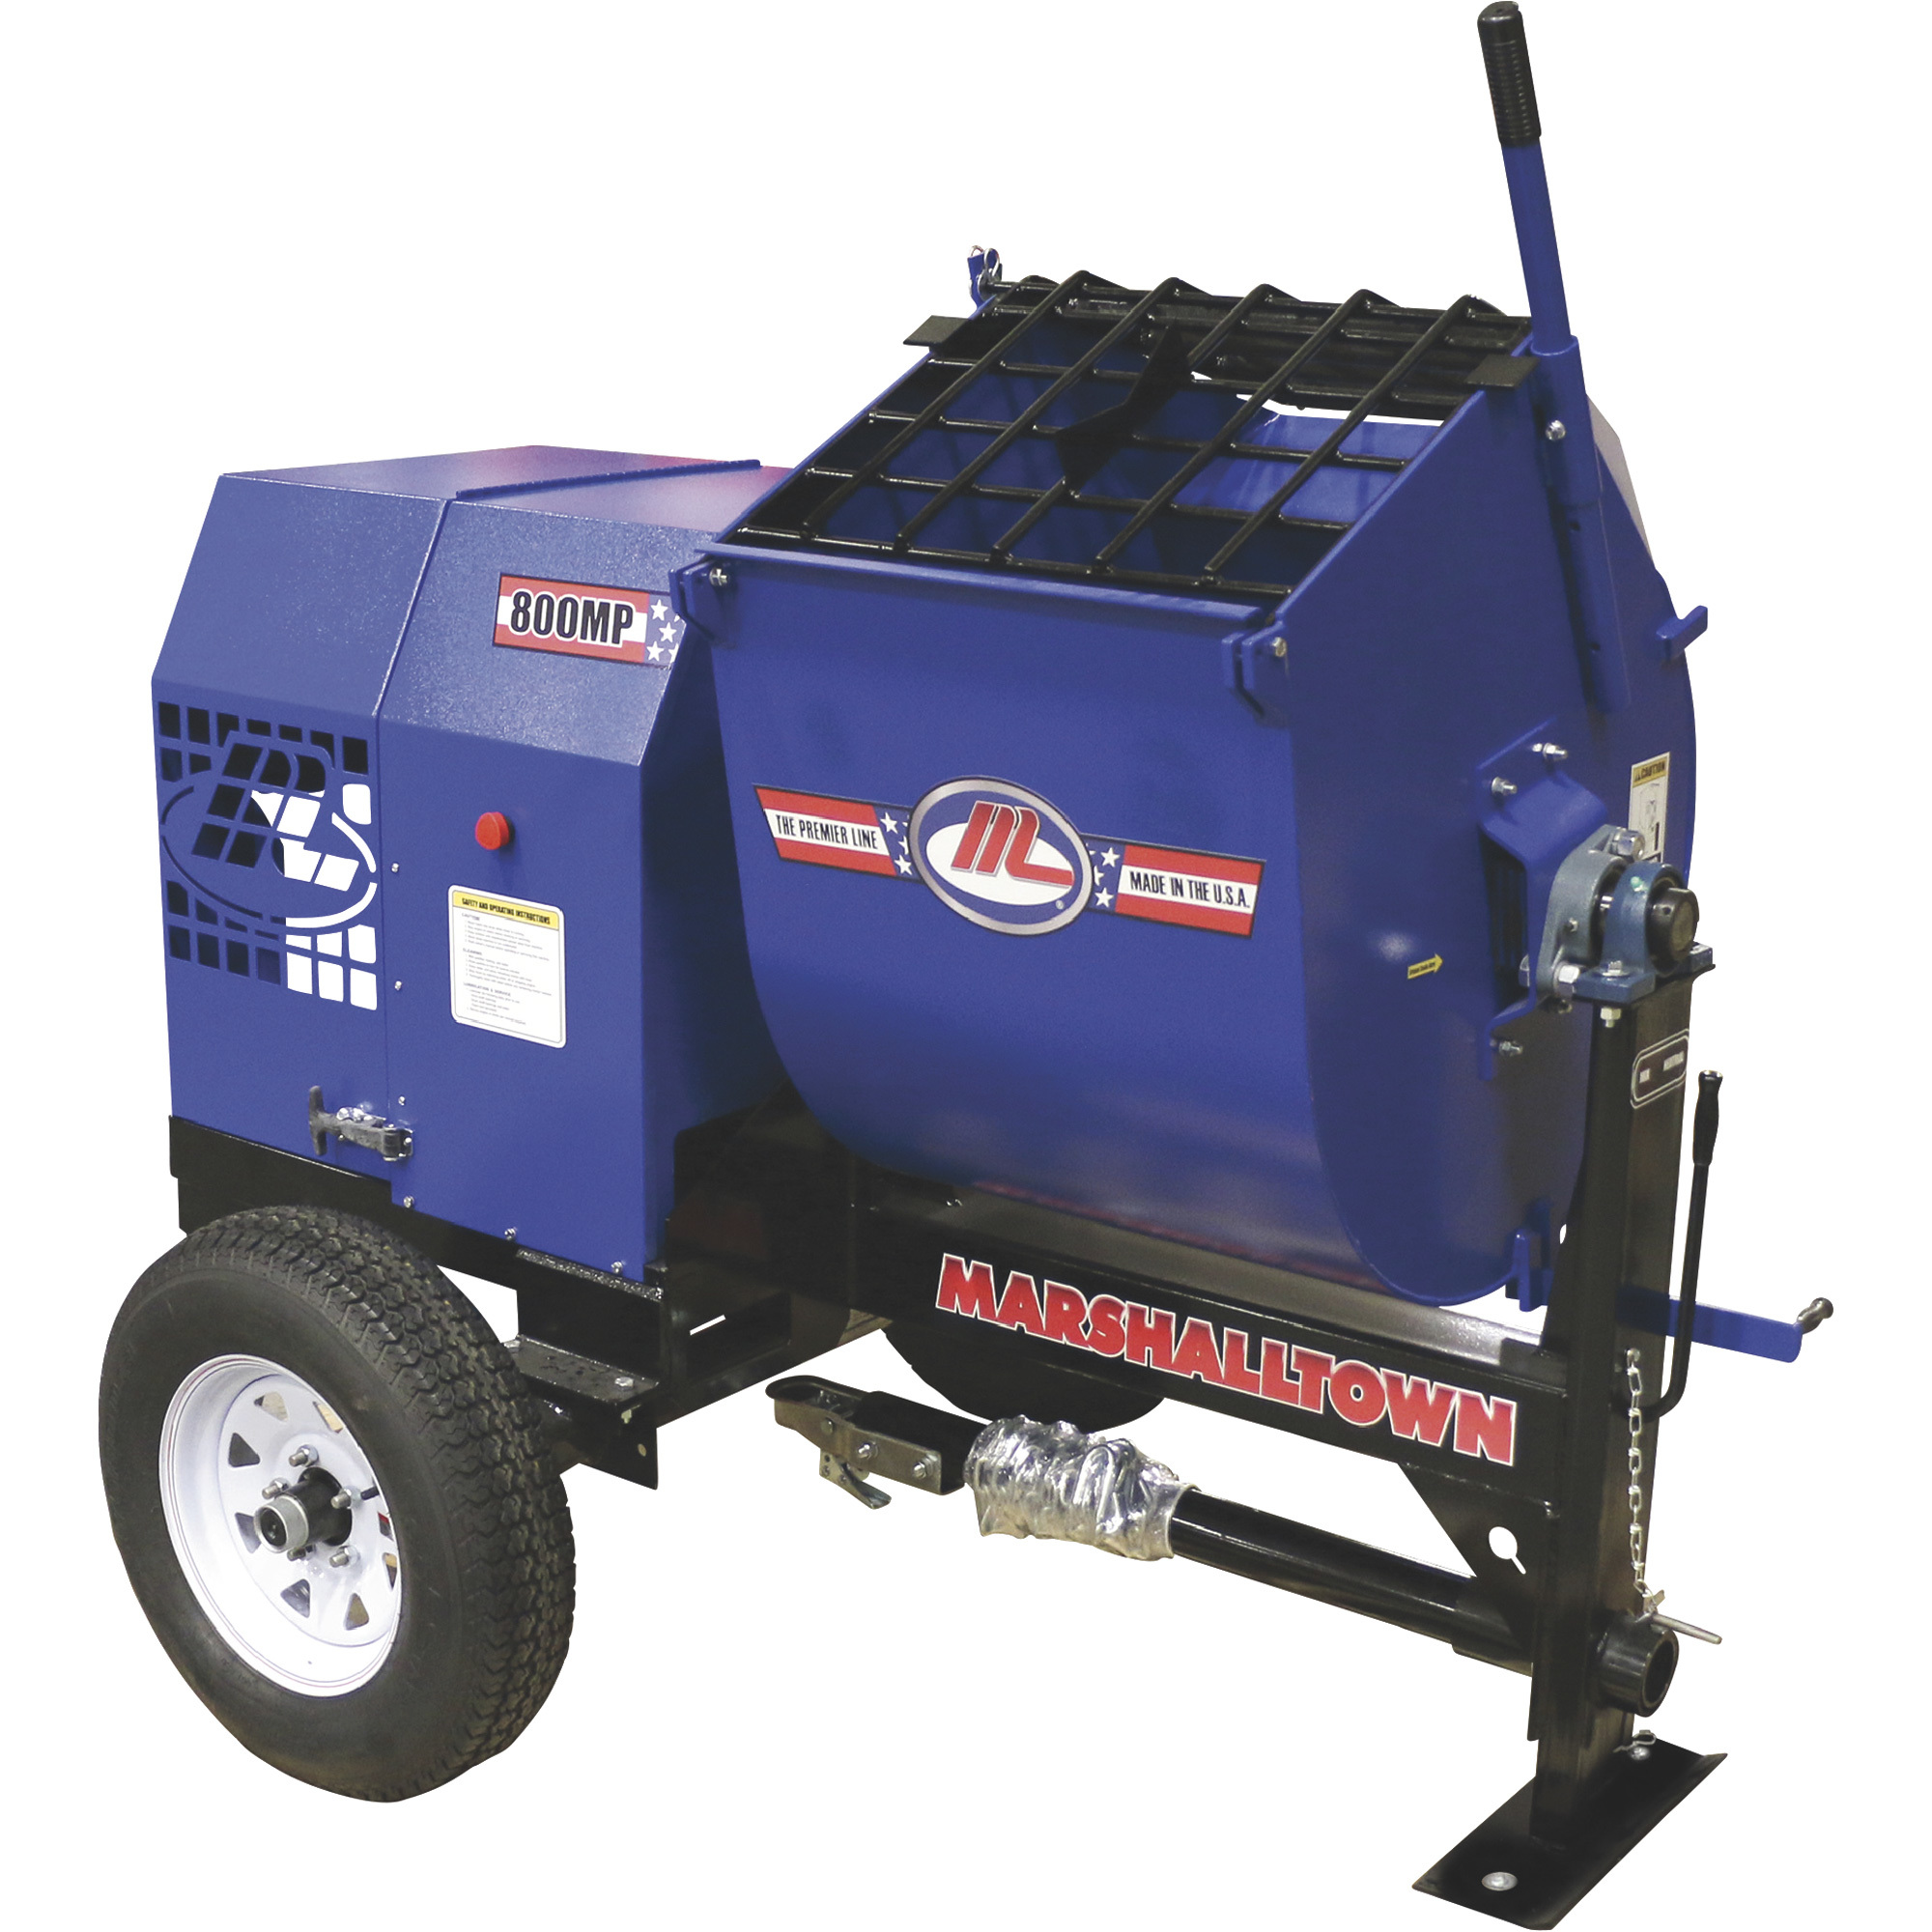 Marshalltown 800MP Mortar/Plaster Mixer with Pintle Tow and Outriggers and 8 HP Gas Engine â Model 800MP8HBO